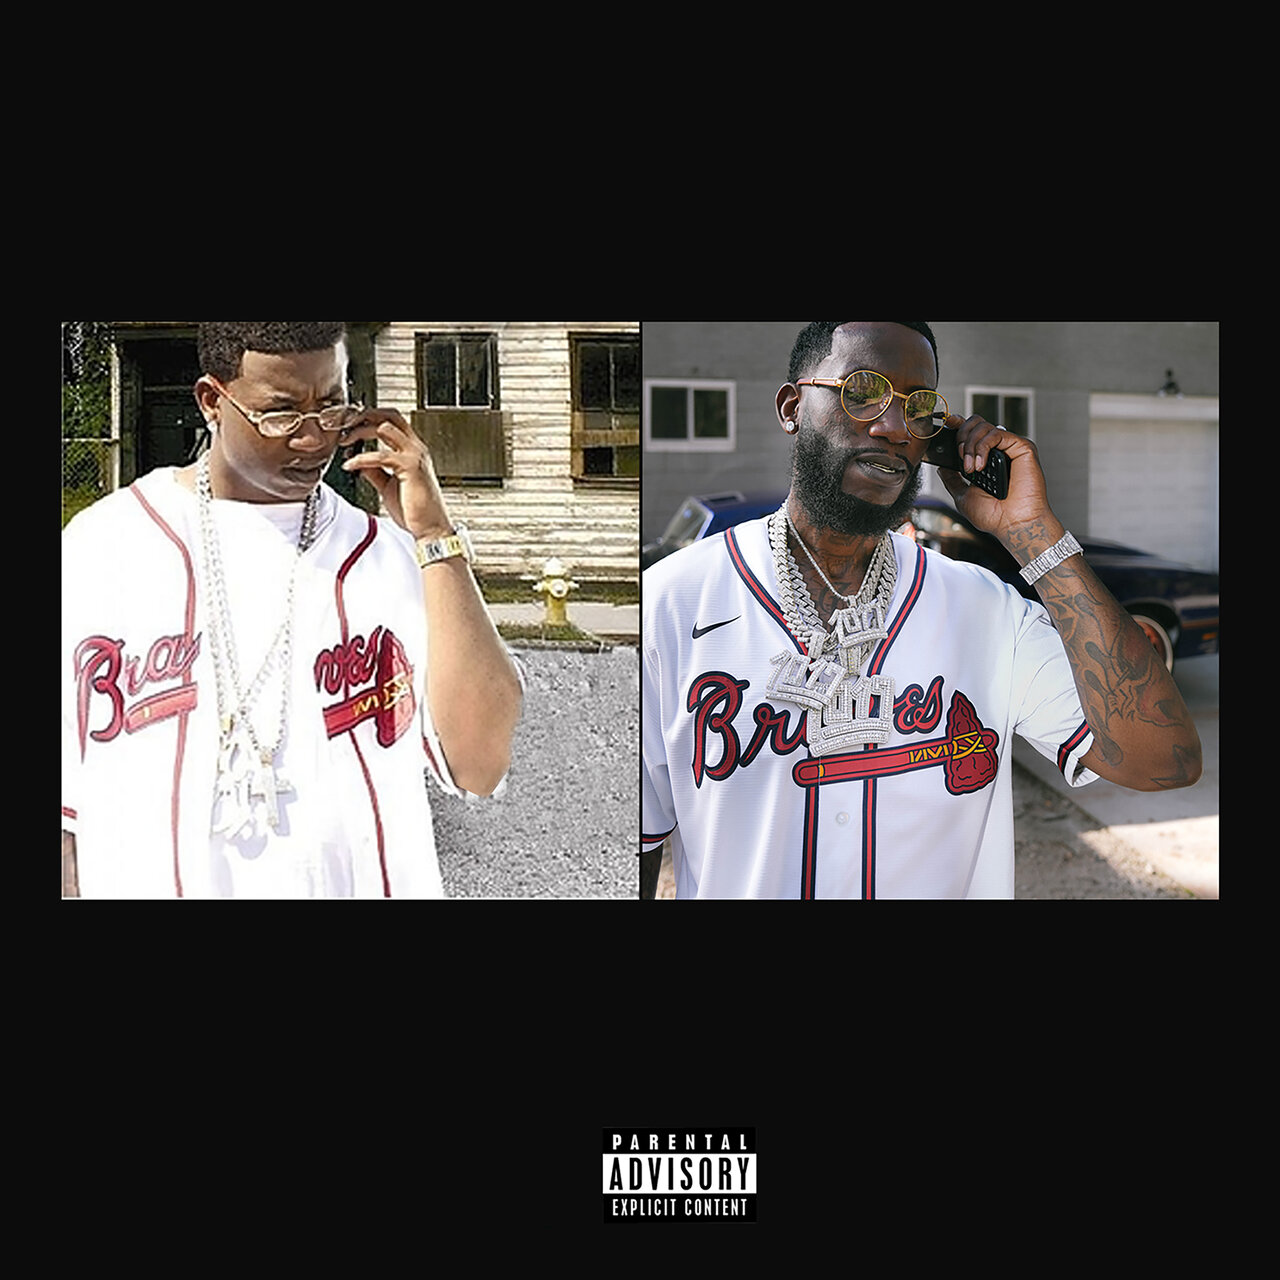 Gucci Mane - 06 Gucci (ft. DaBaby and 21 Savage) (Cover)